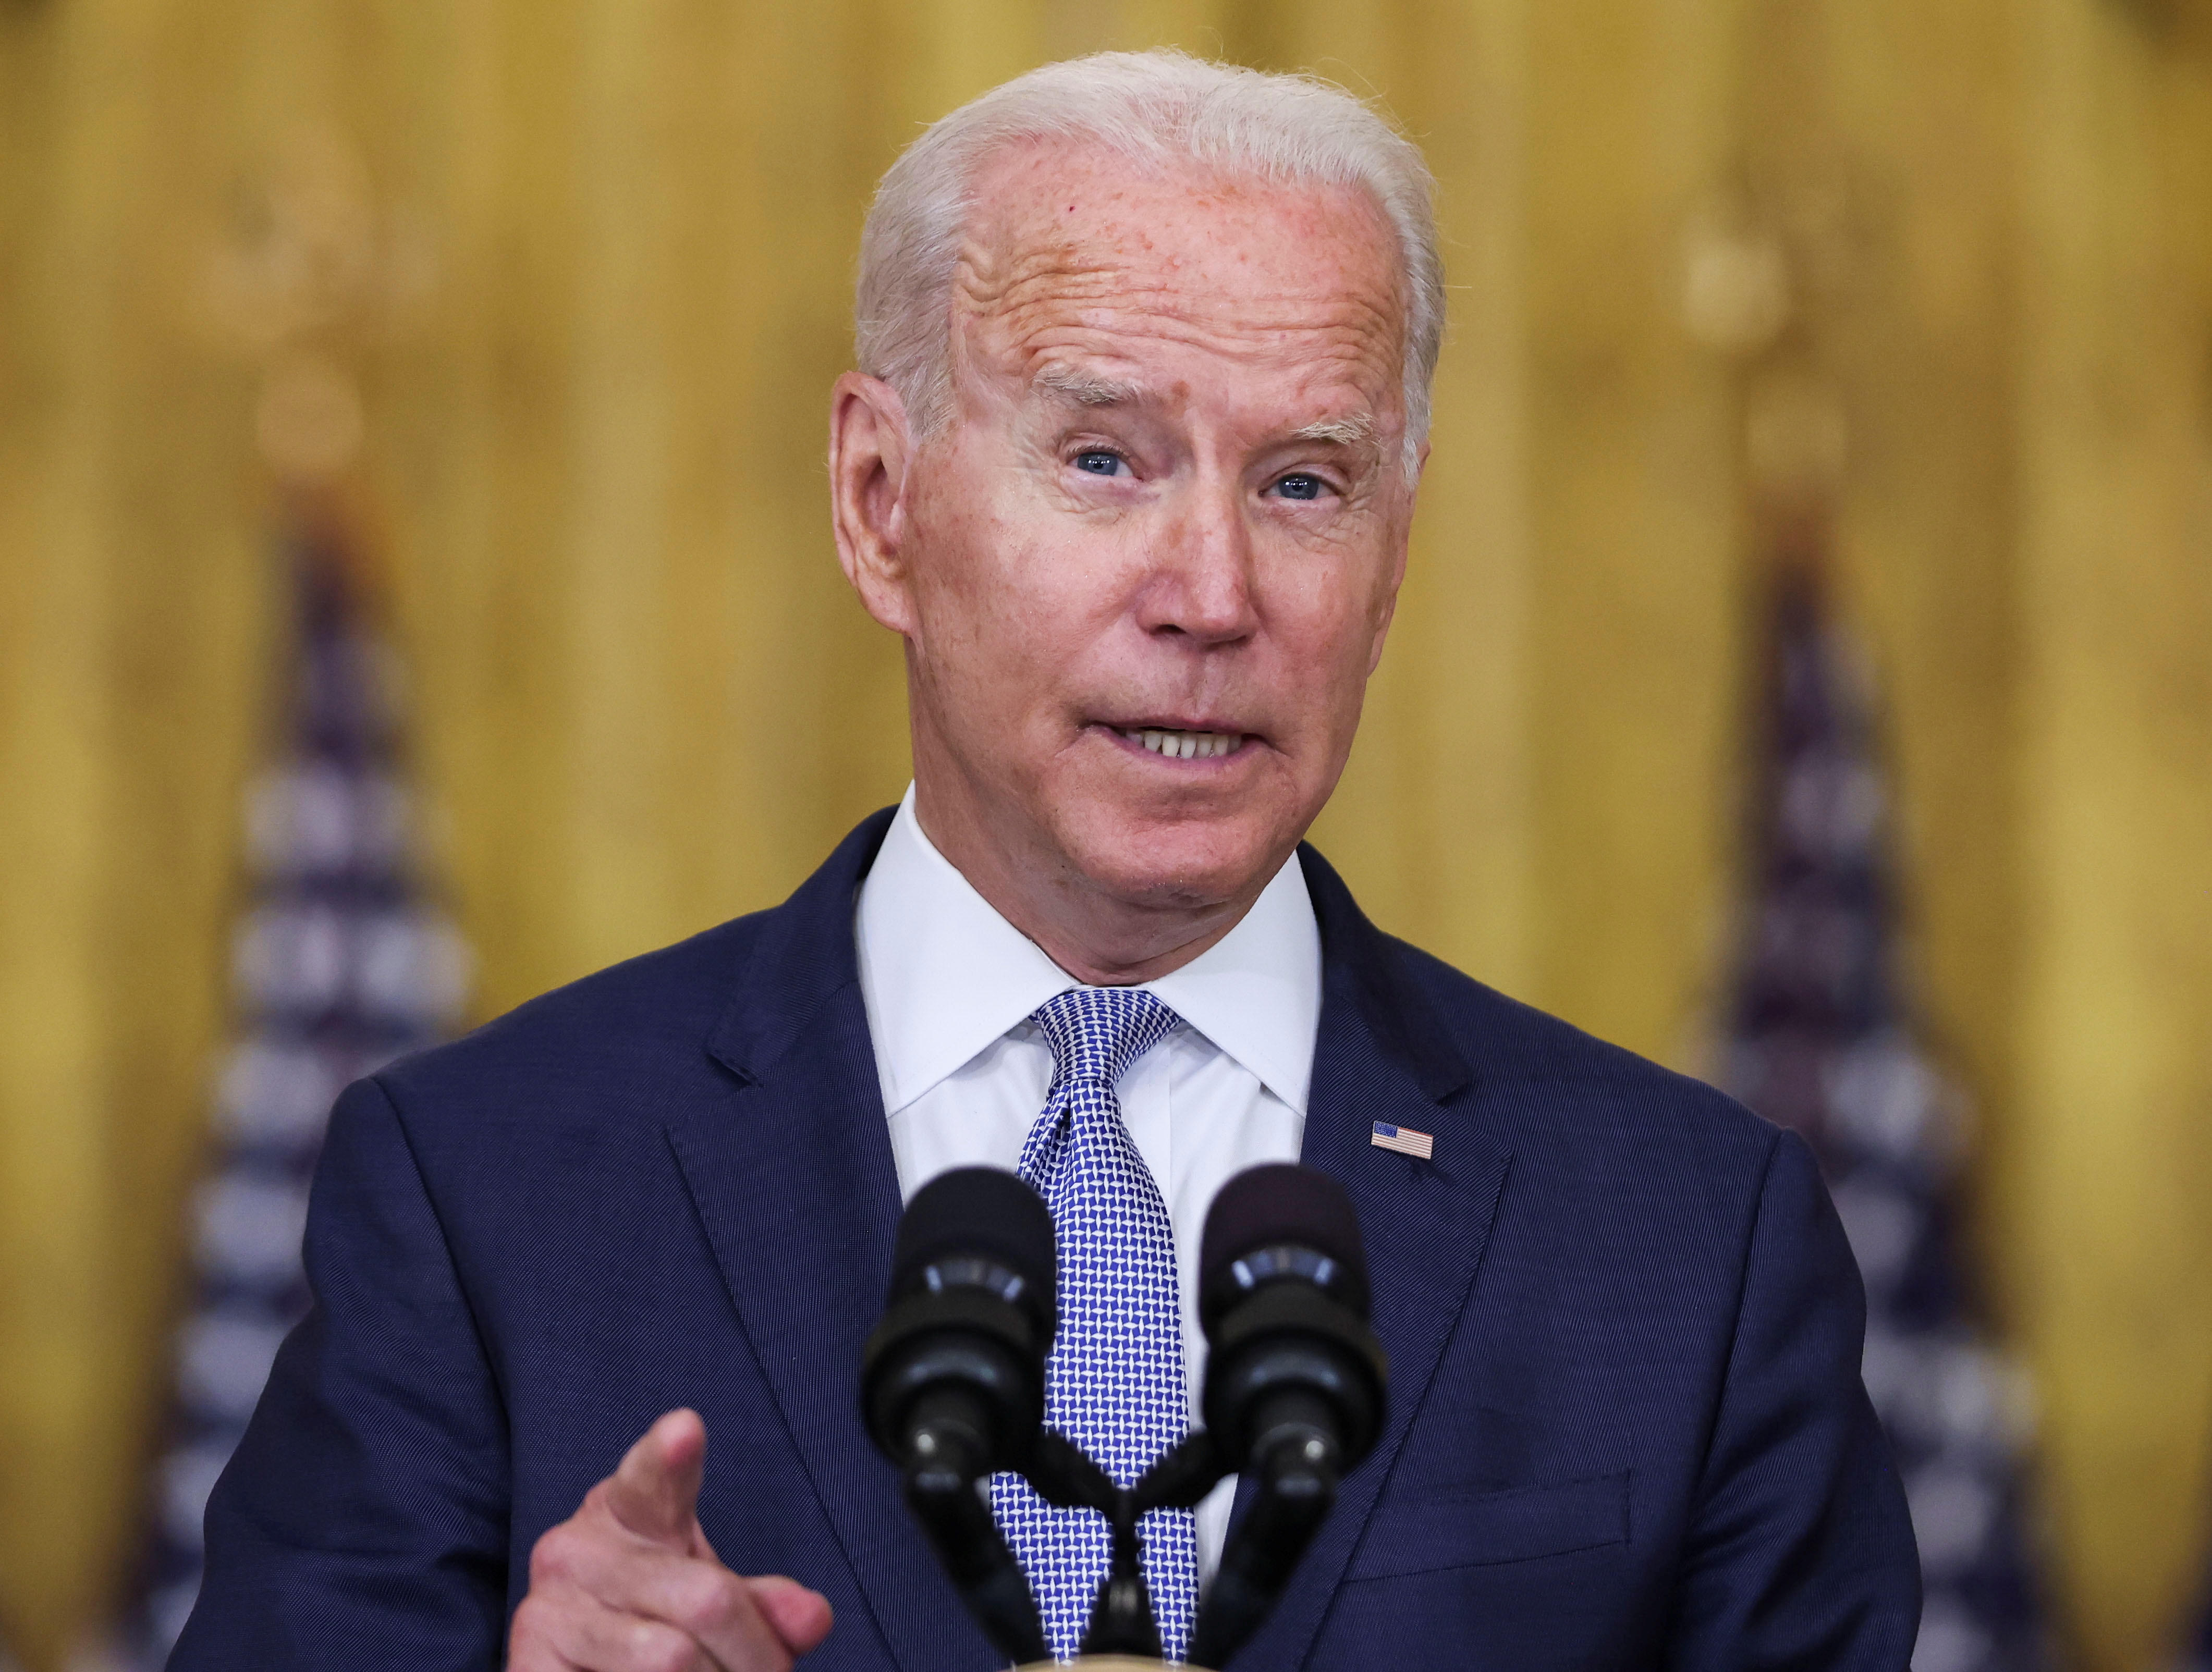 U.S. President Biden discusses administration efforts to lower drug prices in a speech at the White House in Washington